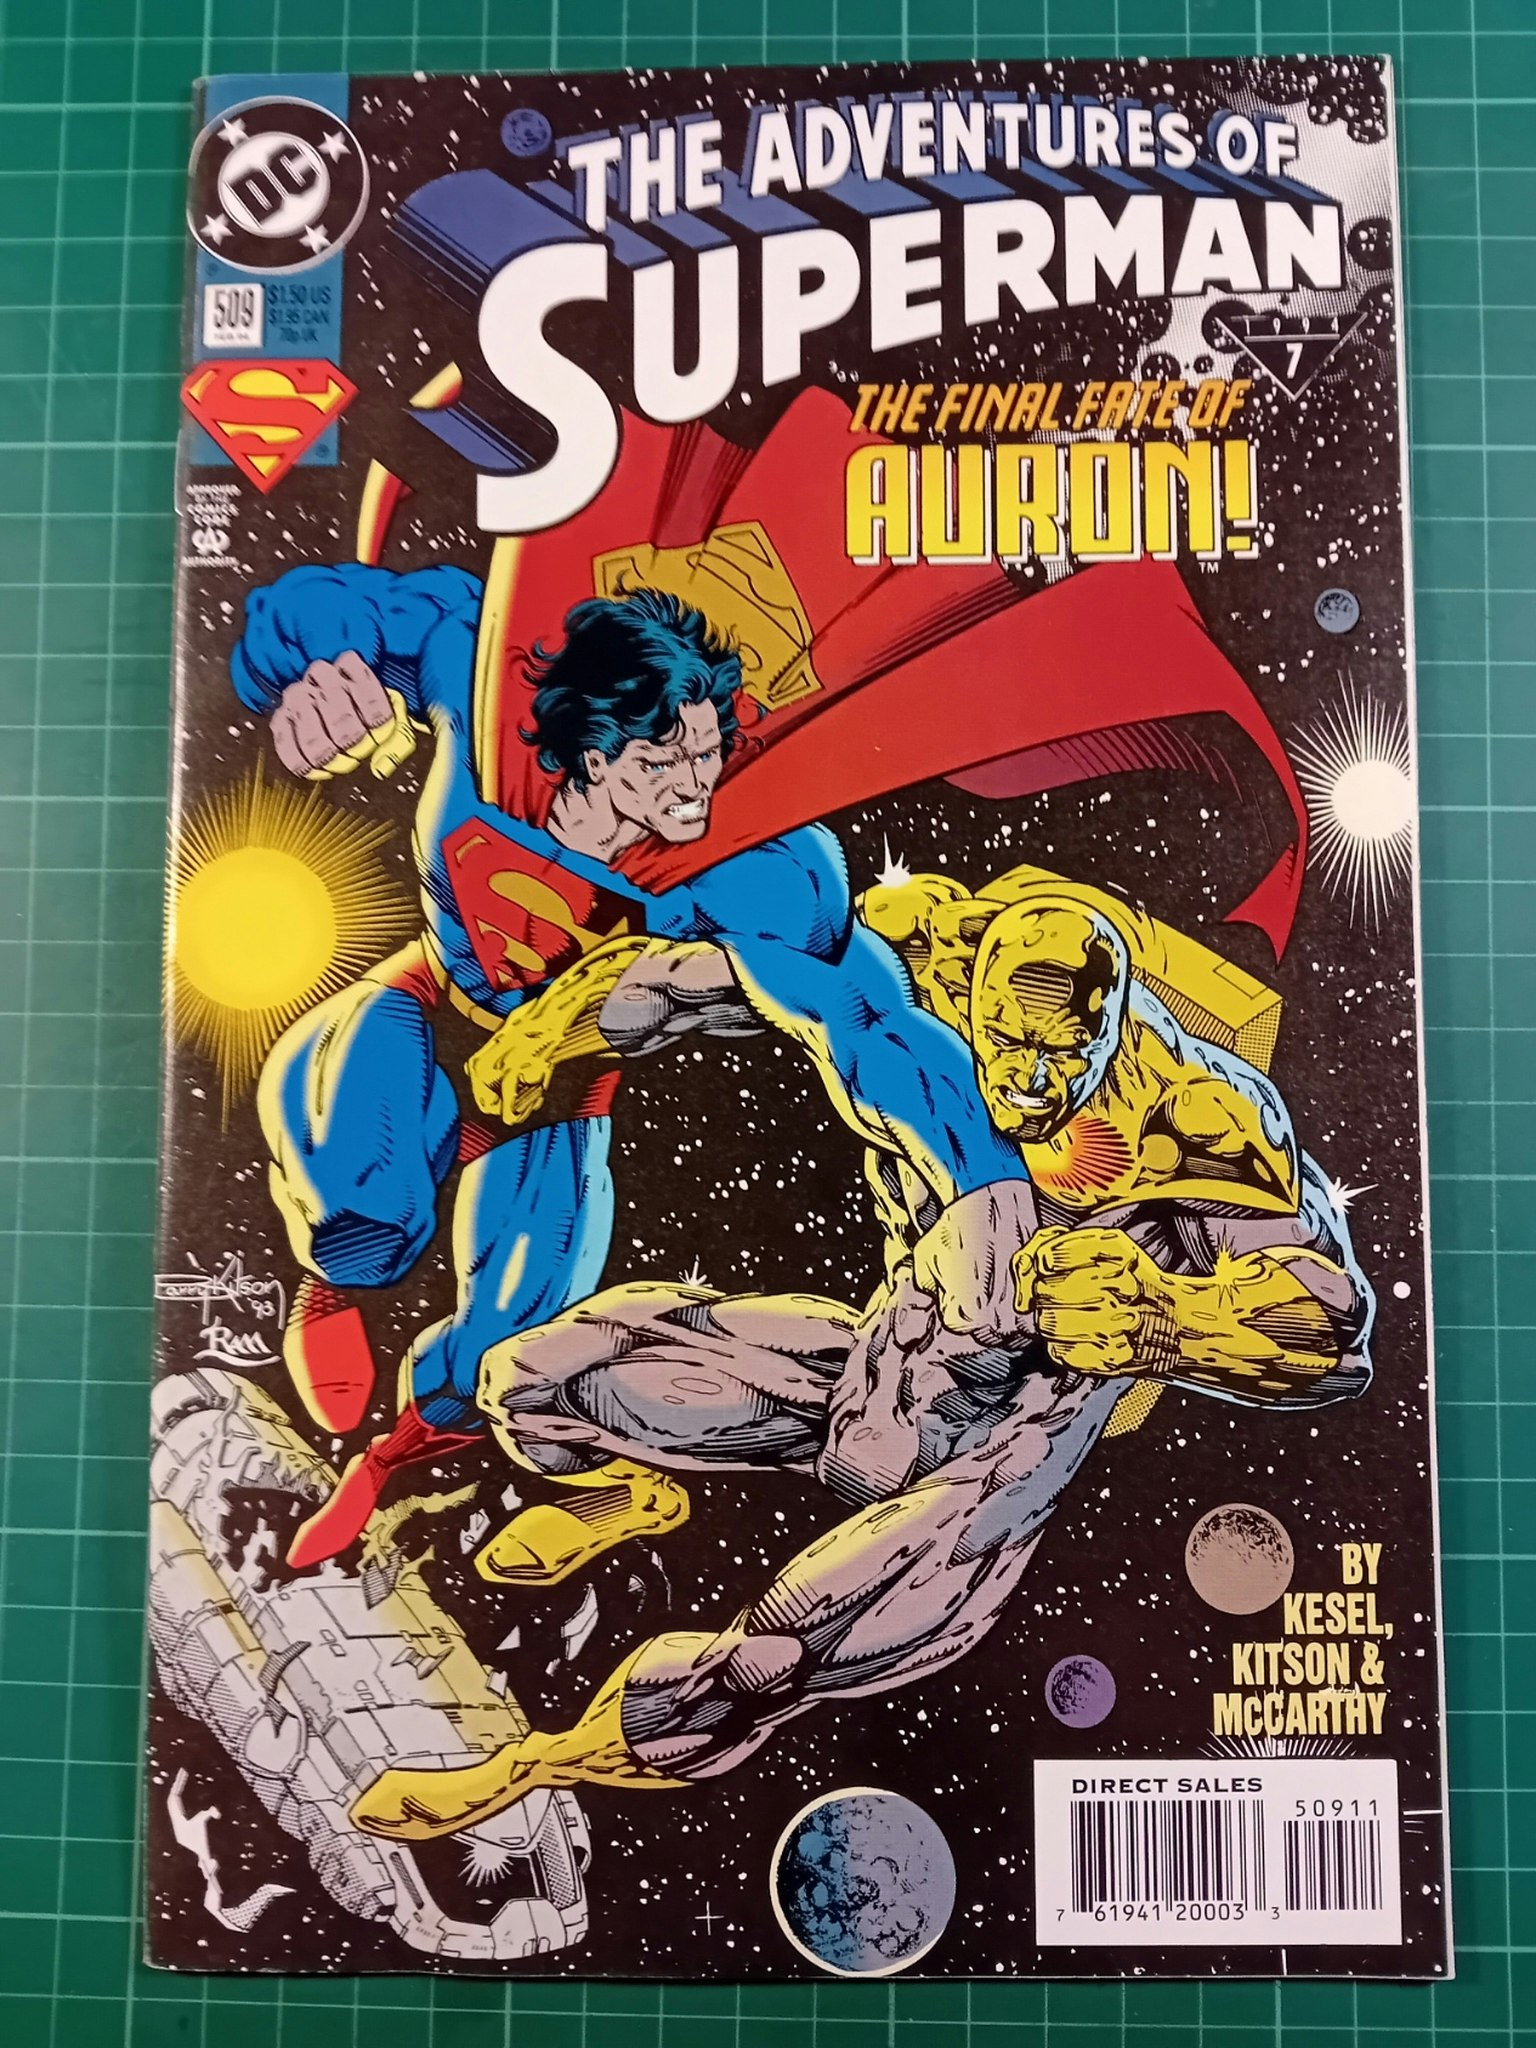 The adventures of Superman #509